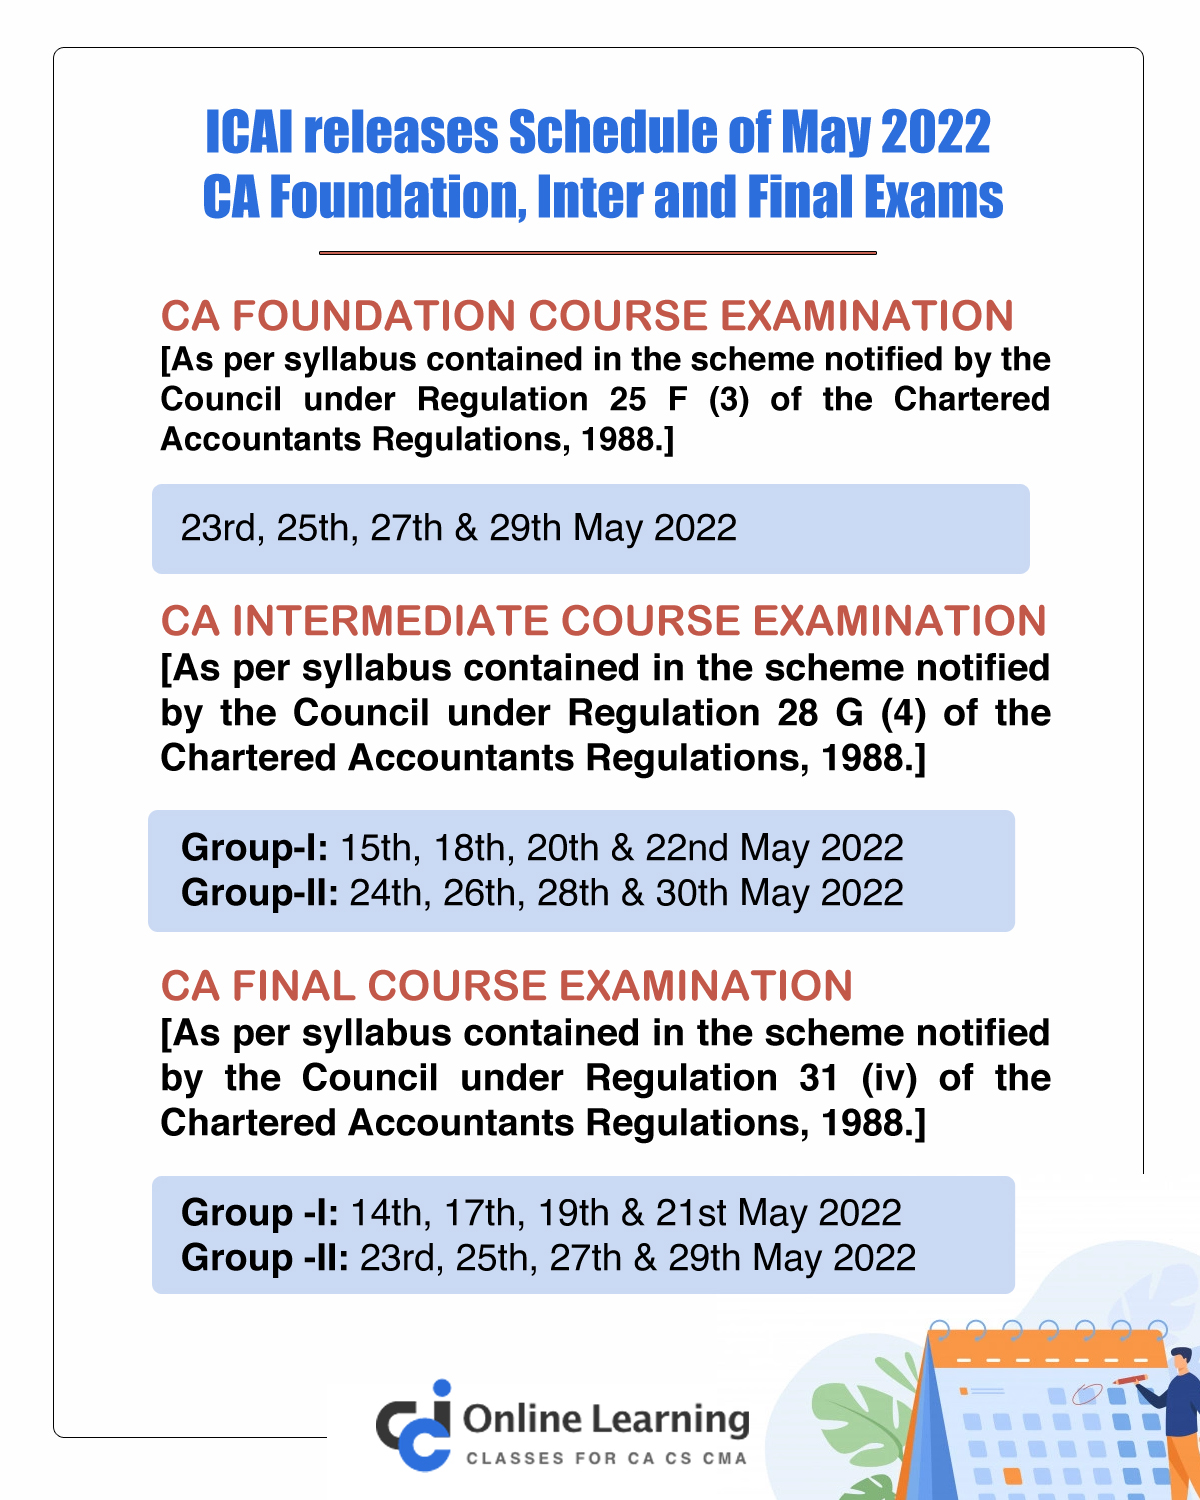 ICAI releases Schedule of May 2022 CA Foundation, Inter and Final Exams